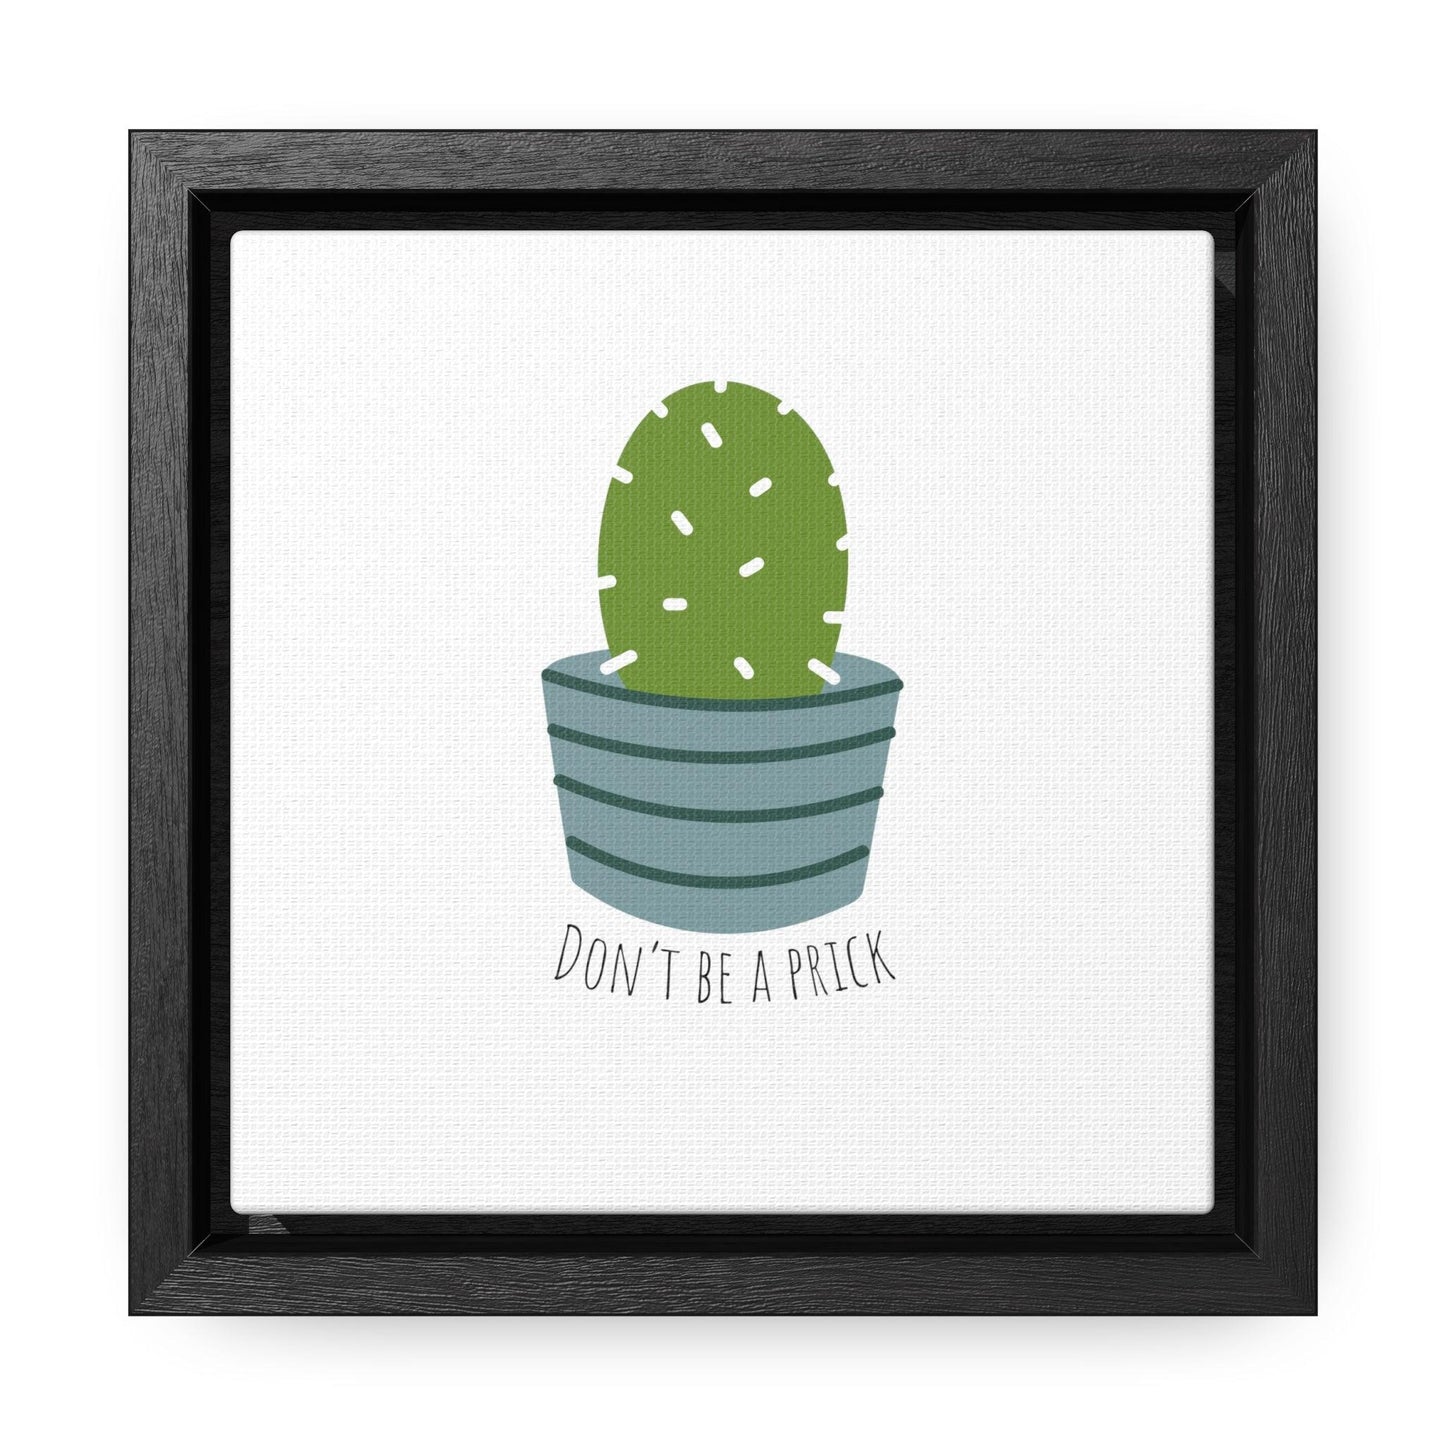 Don't be a prick - Gallery Canvas Wraps, Square Frame - Moxie Graphics